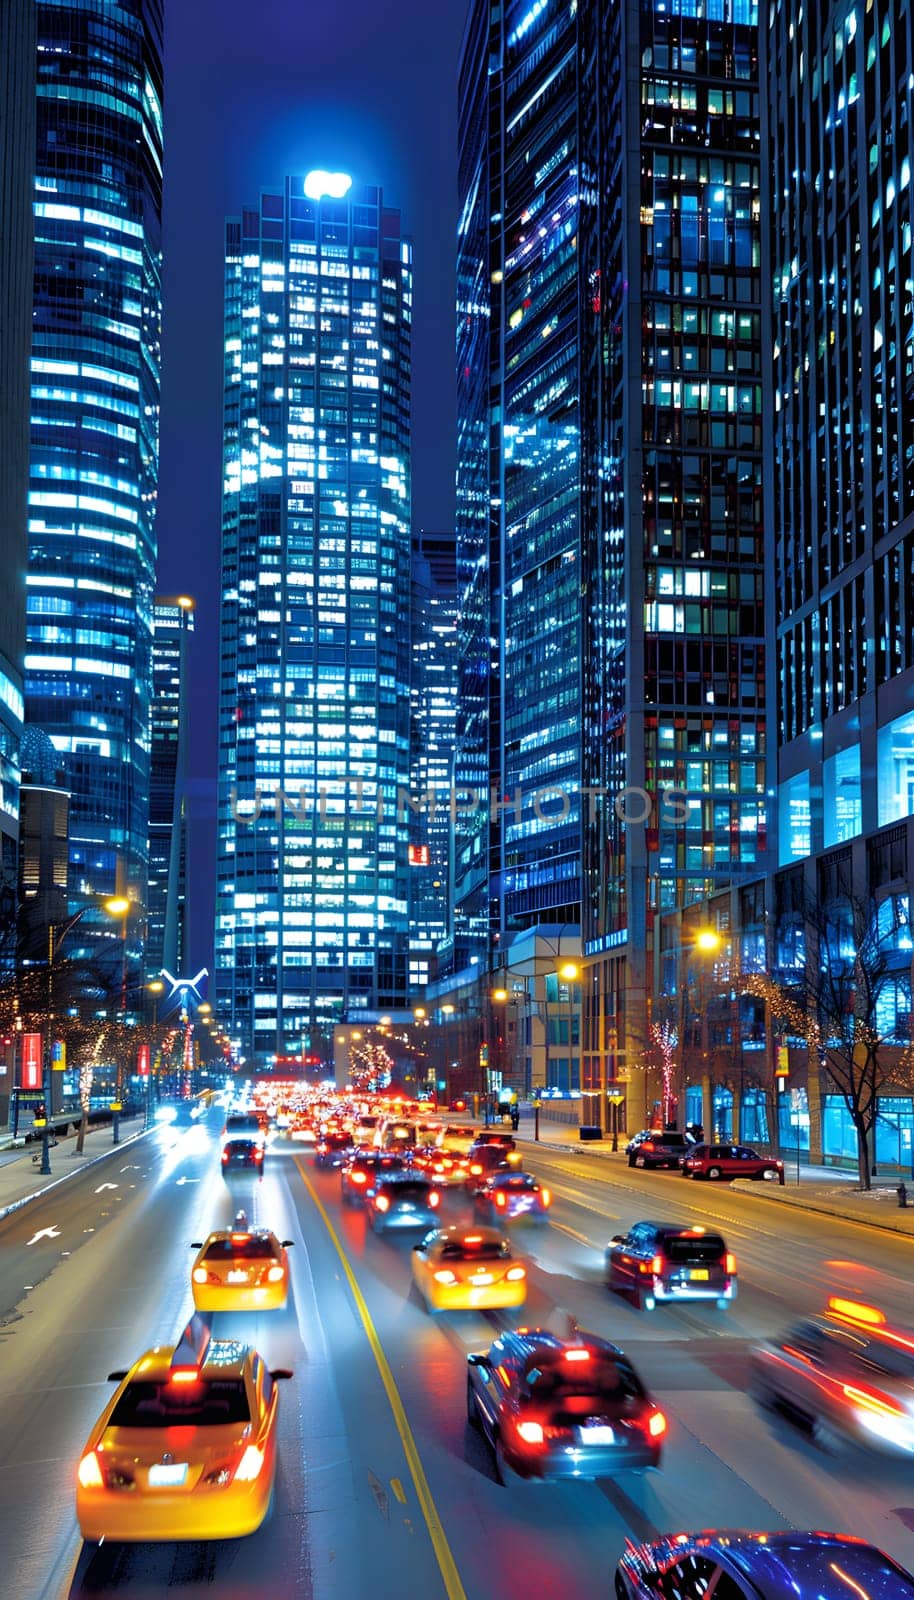 A bustling city street at night with taxis and cars driving by towering skyscrapers and illuminated buildings, creating a vibrant cityscape